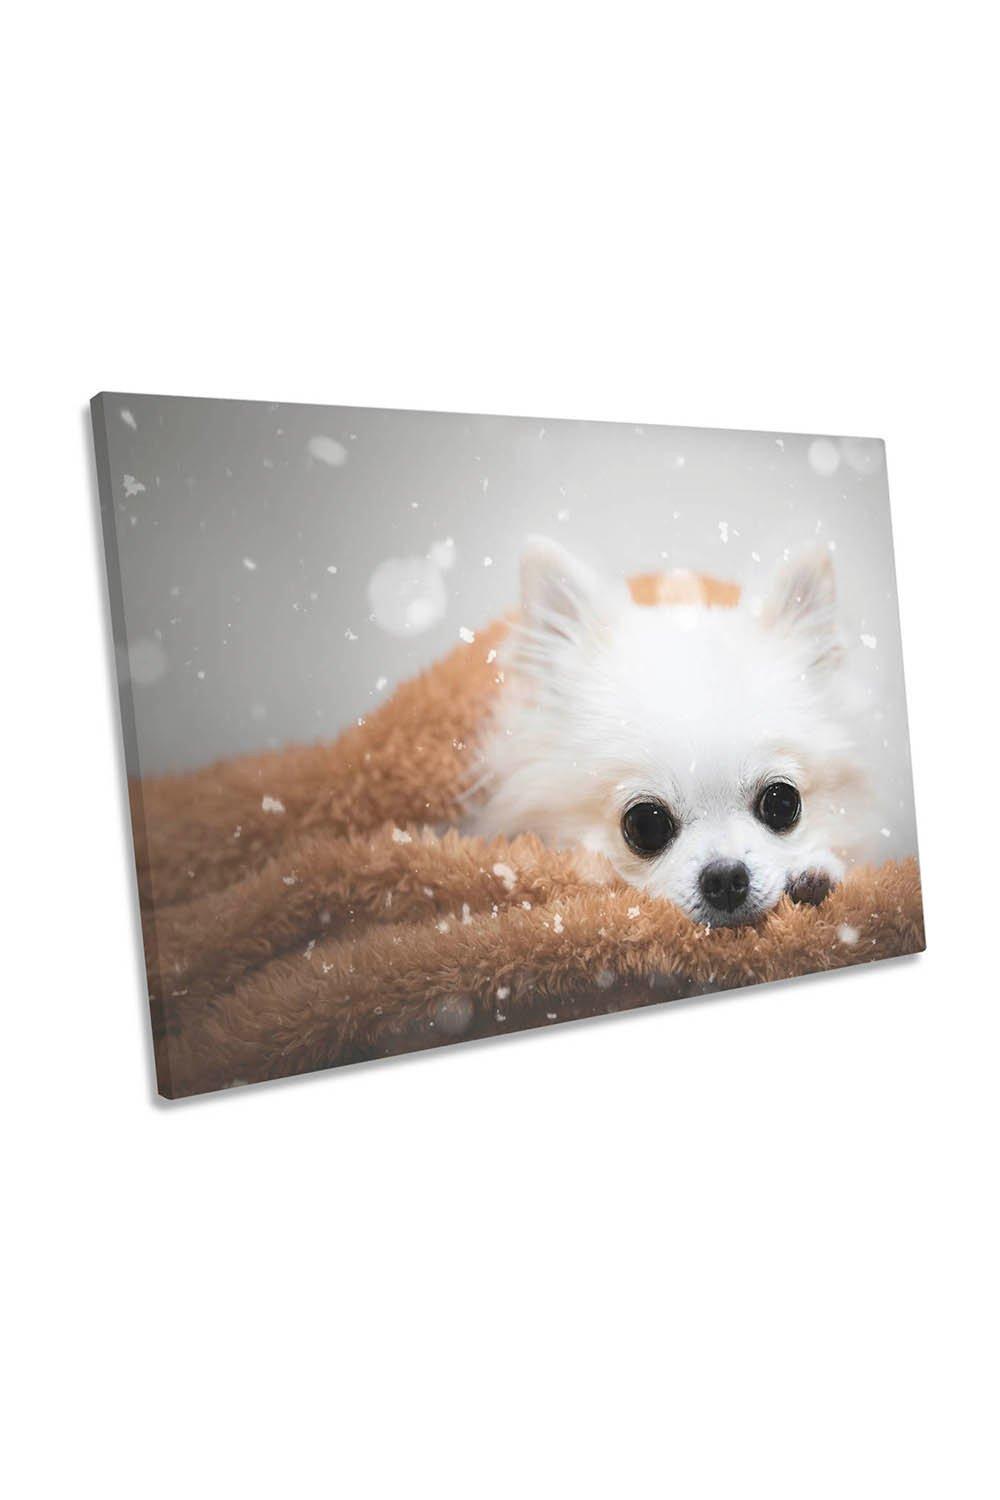 One Day in Winter Chihuahua Dog Cute Canvas Wall Art Picture Print